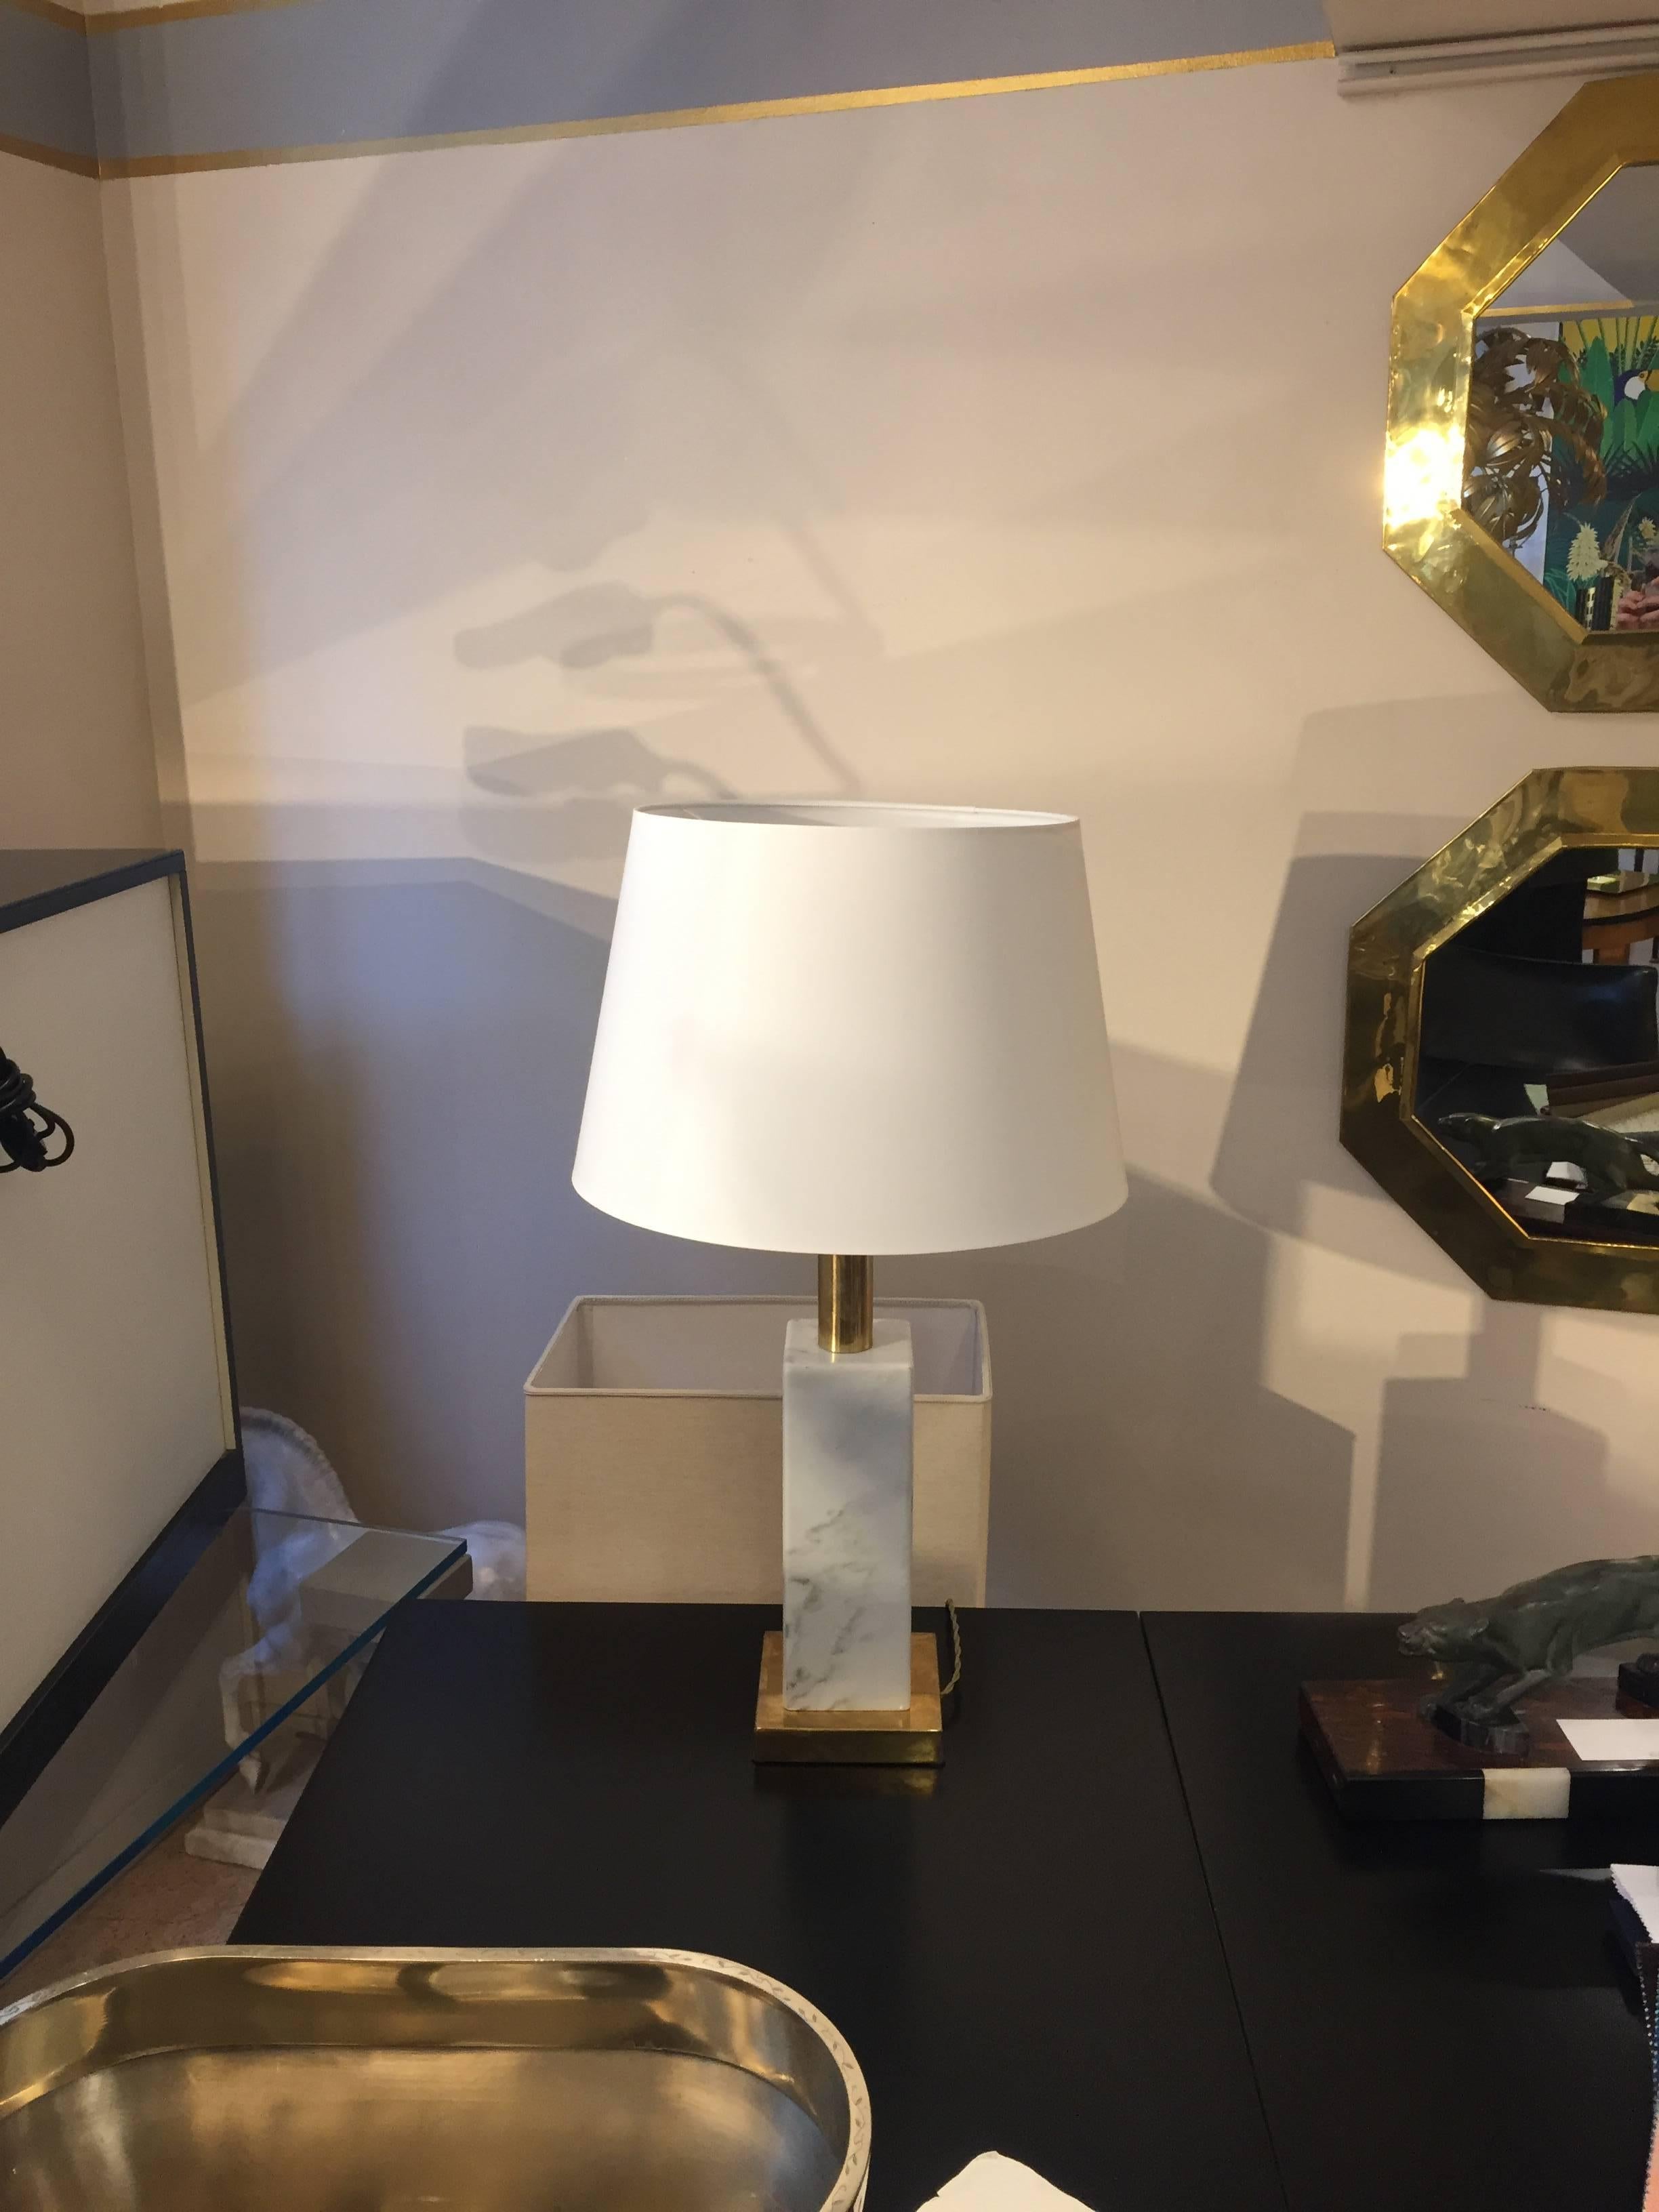 1960s table lamps from Italy. White Carrara marble squared base with golden brass details. Recent but customizable white rounded lampshade. These table lamps are very solid ones since the marble is massive, further the brass detail confer these